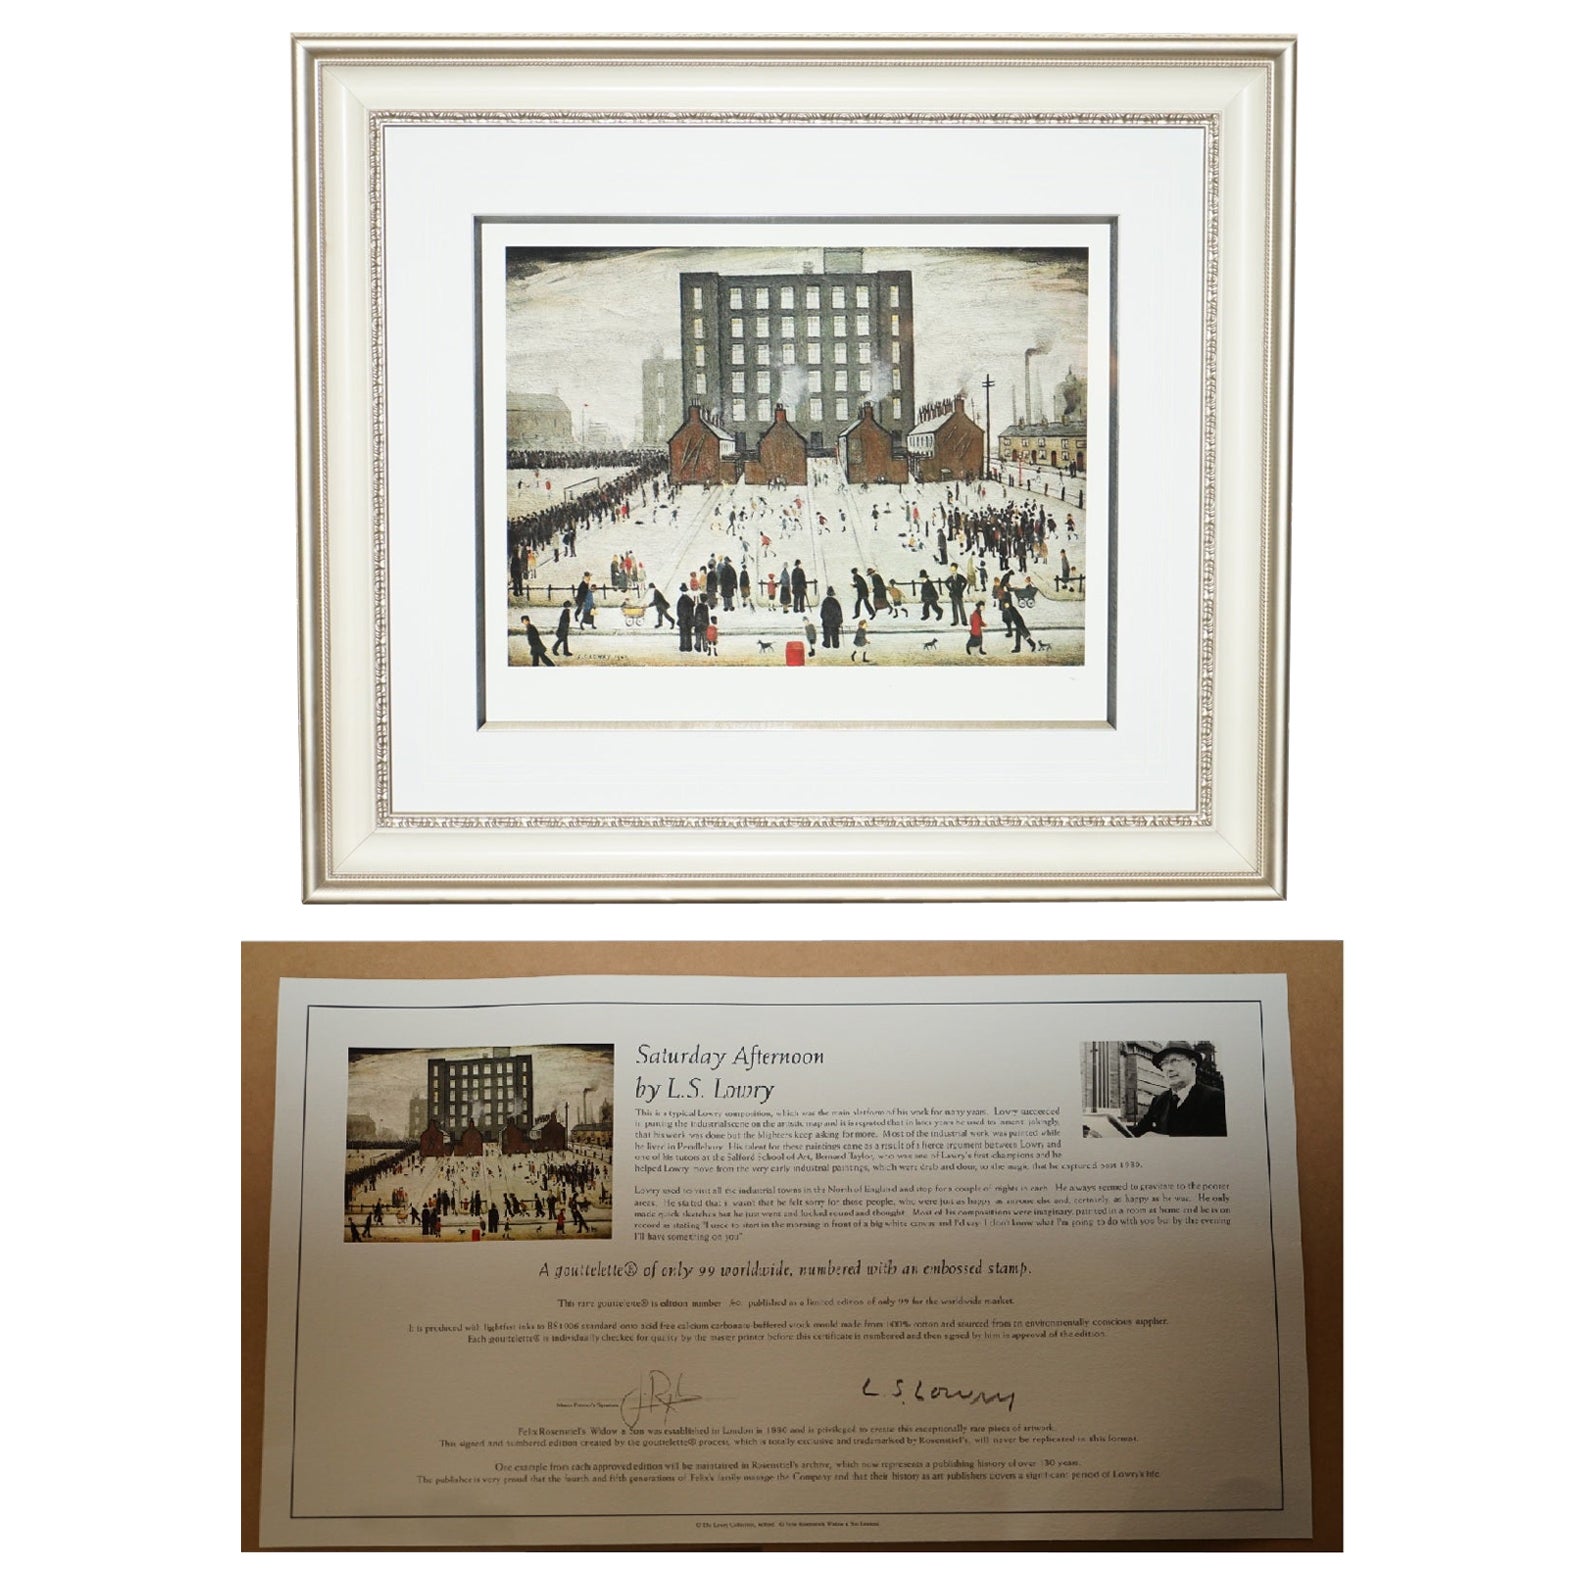 L S LOWRY SATURDAY AFTERNOON LIMITED EDITION PRINT 60/99 WiTH ALL DOCUMENTATION For Sale